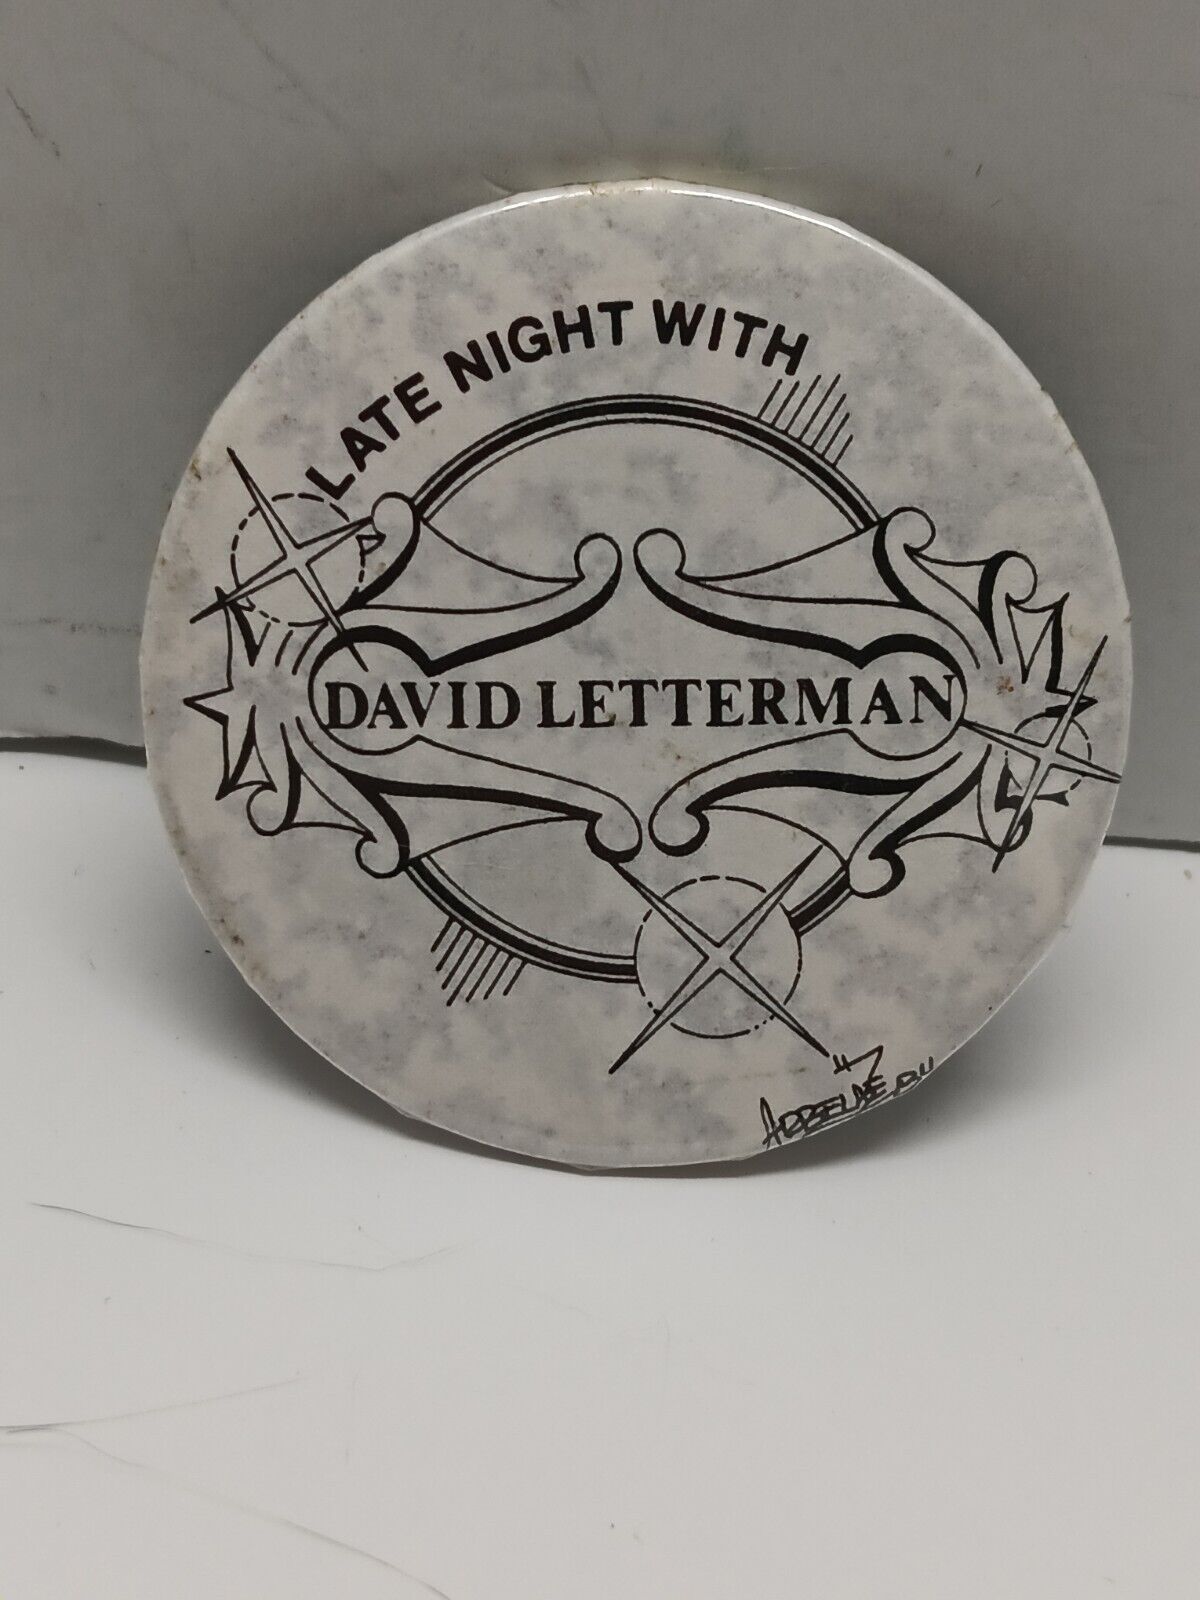 Late Night With David Letterman Button, 1984 Vintage, Arbelae